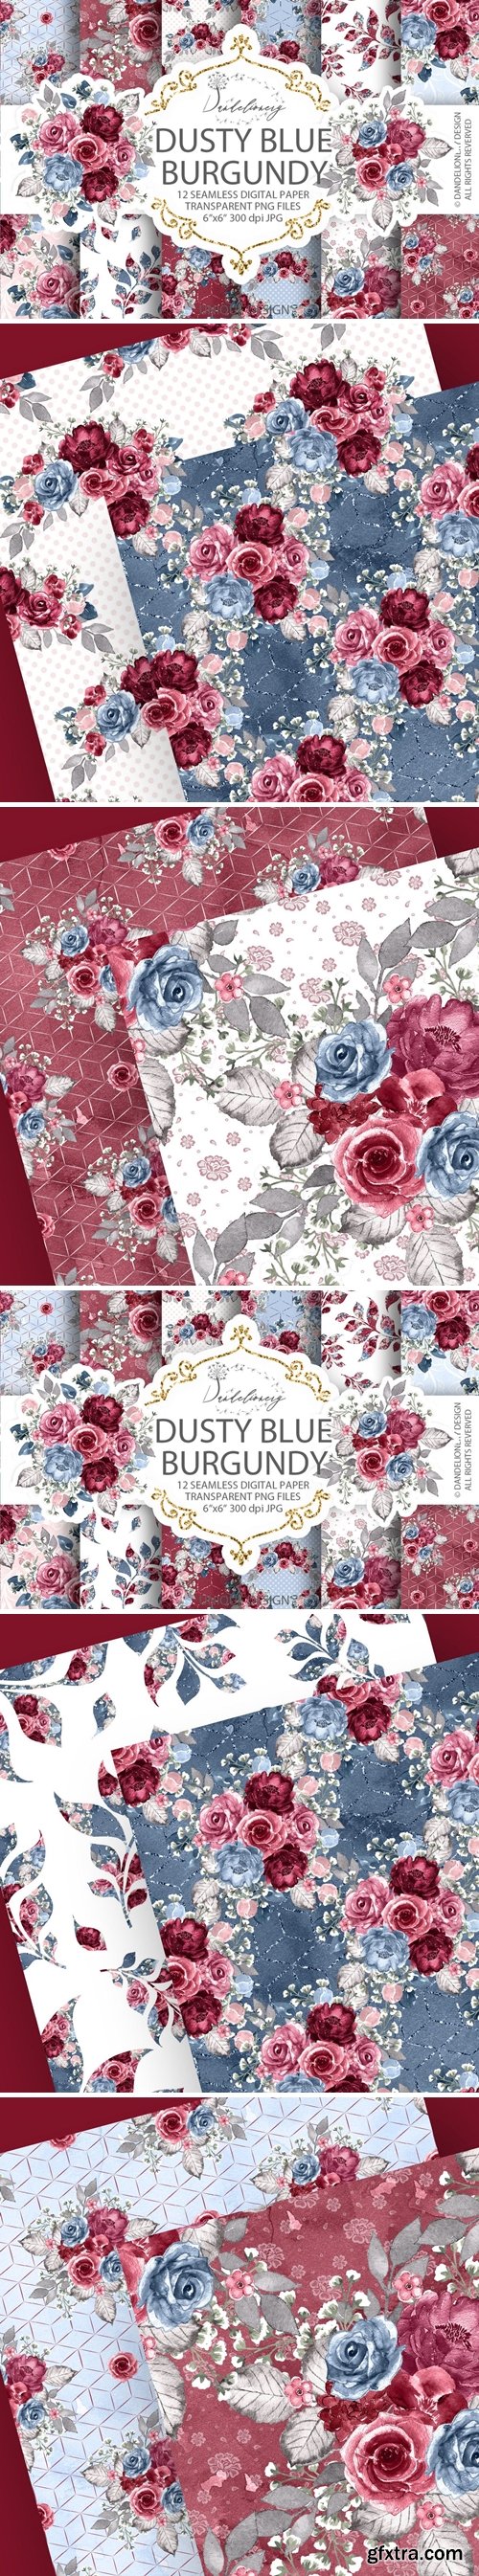 Watercolor Dusty Blue and Burgundy digital paper